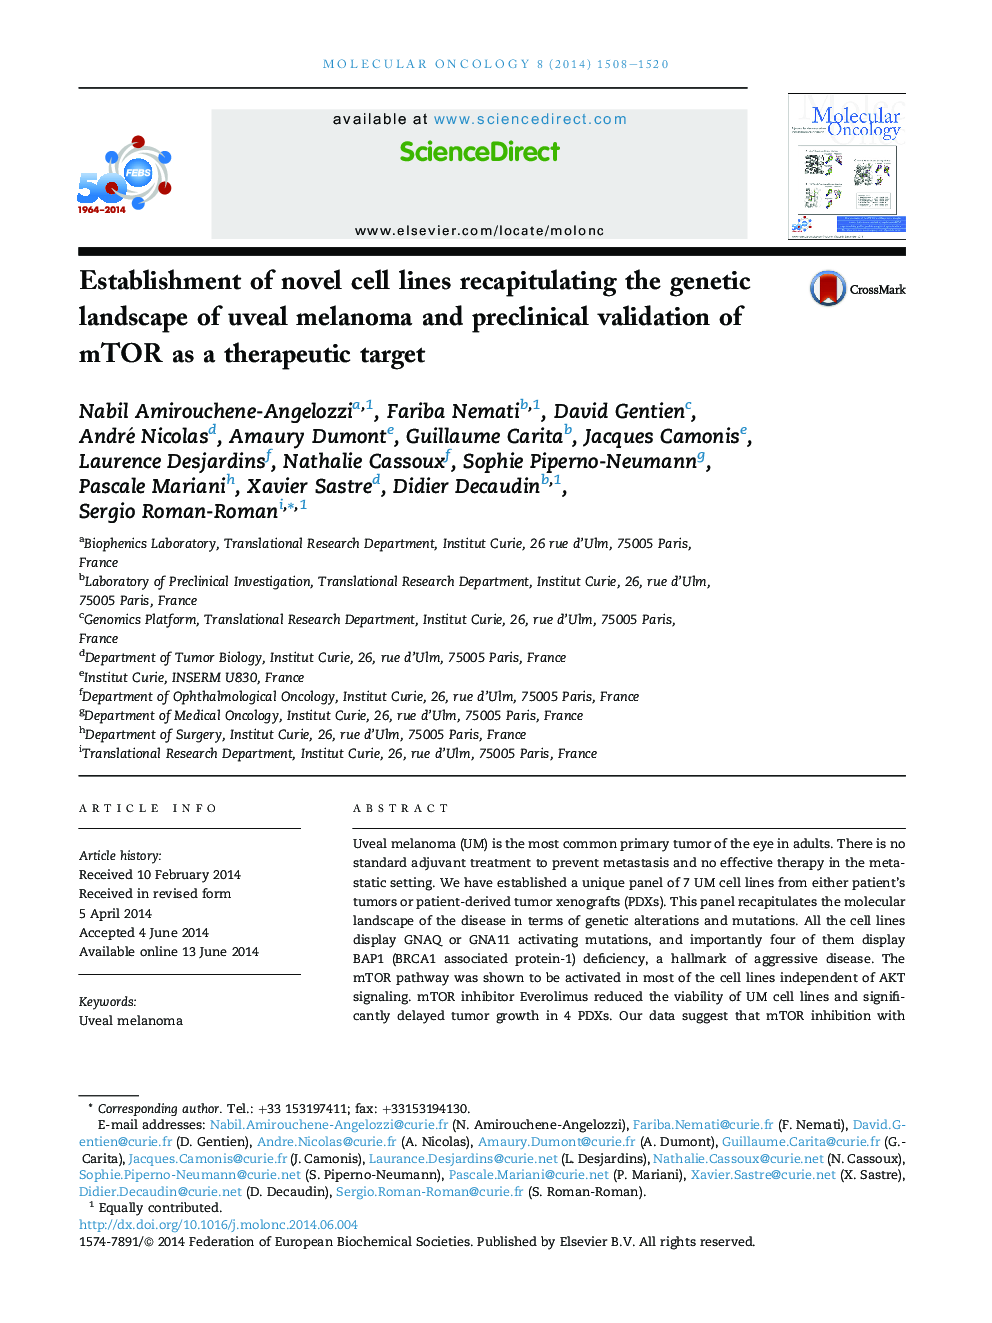 Establishment of novel cell lines recapitulating the genetic landscape of uveal melanoma and preclinical validation of mTOR as a therapeutic target